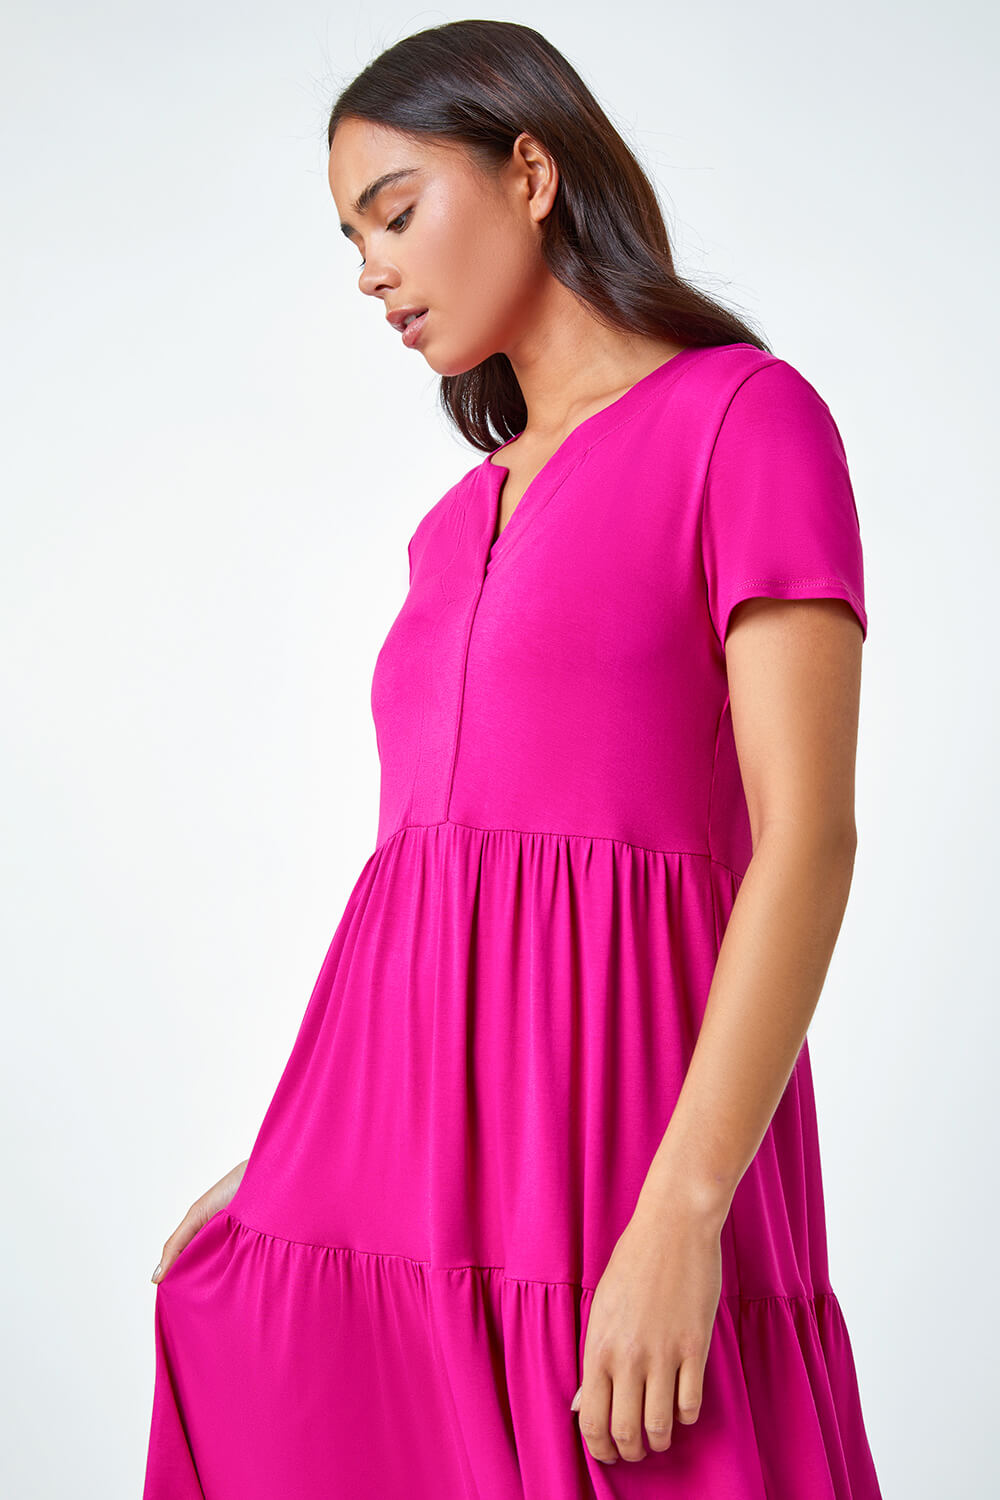 PINK Petite Tiered Stretch T-Shirt Dress, Image 4 of 5